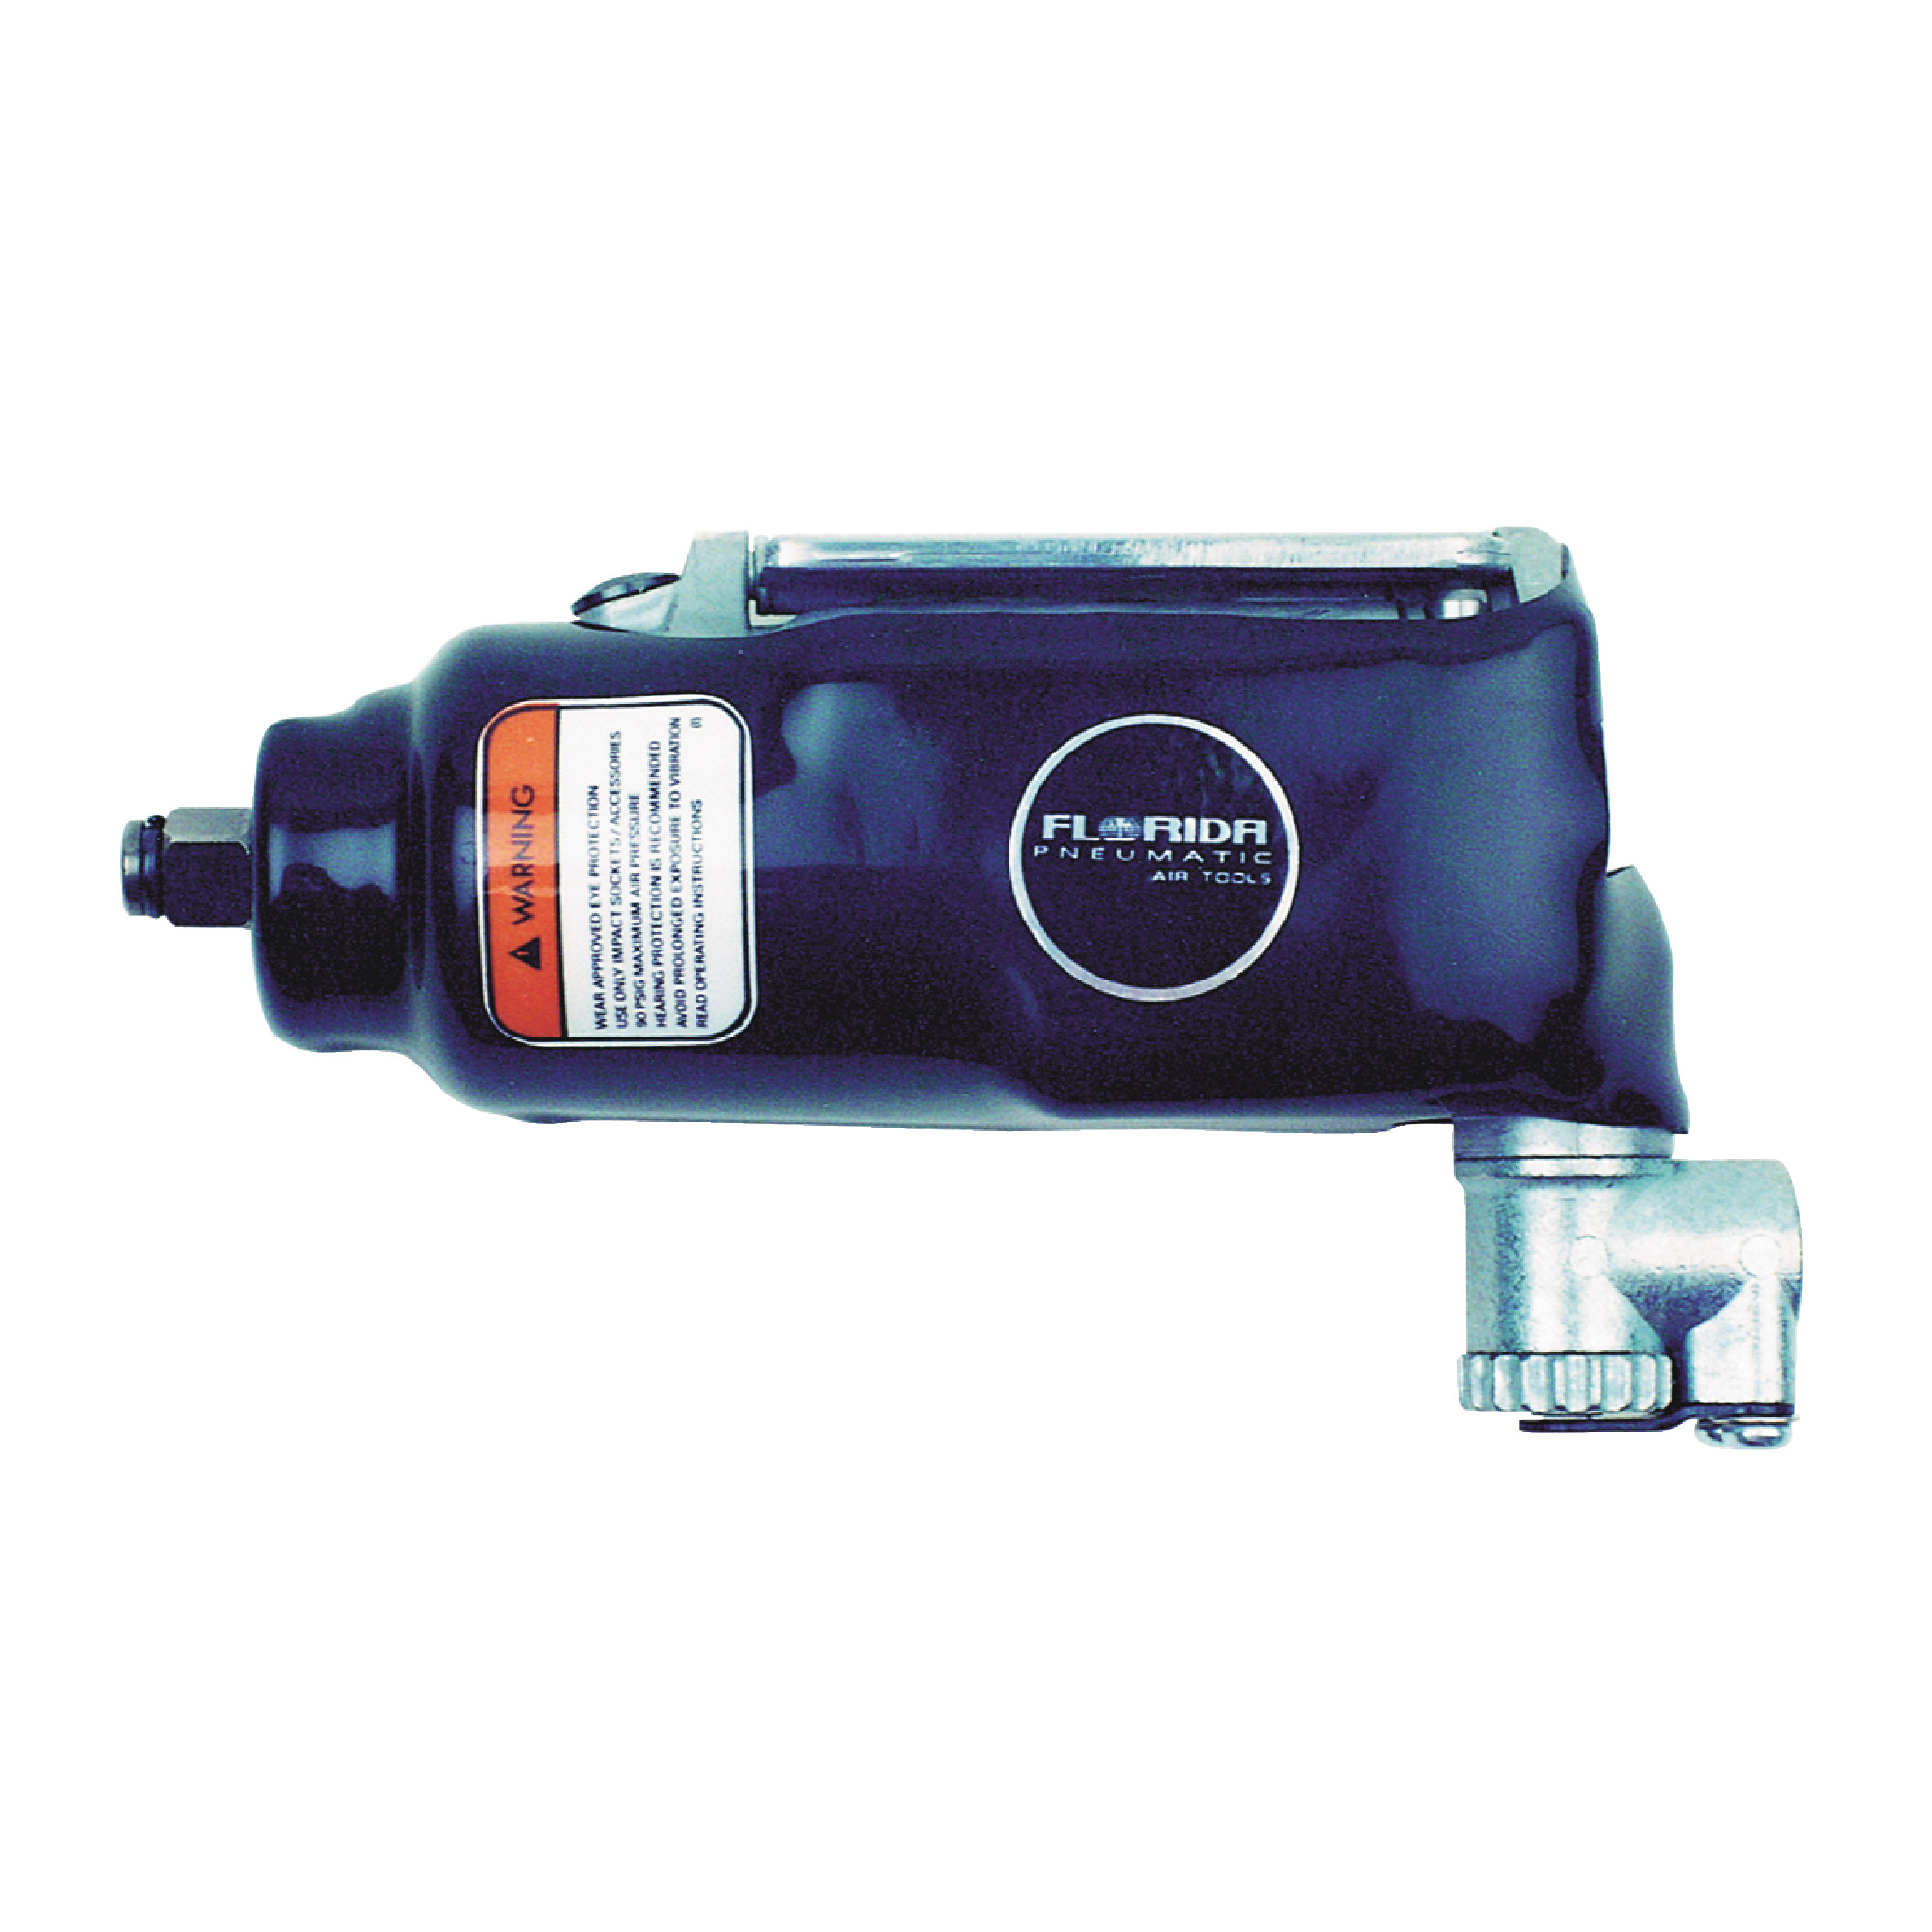 3/8" Butterfly Impact Wrench